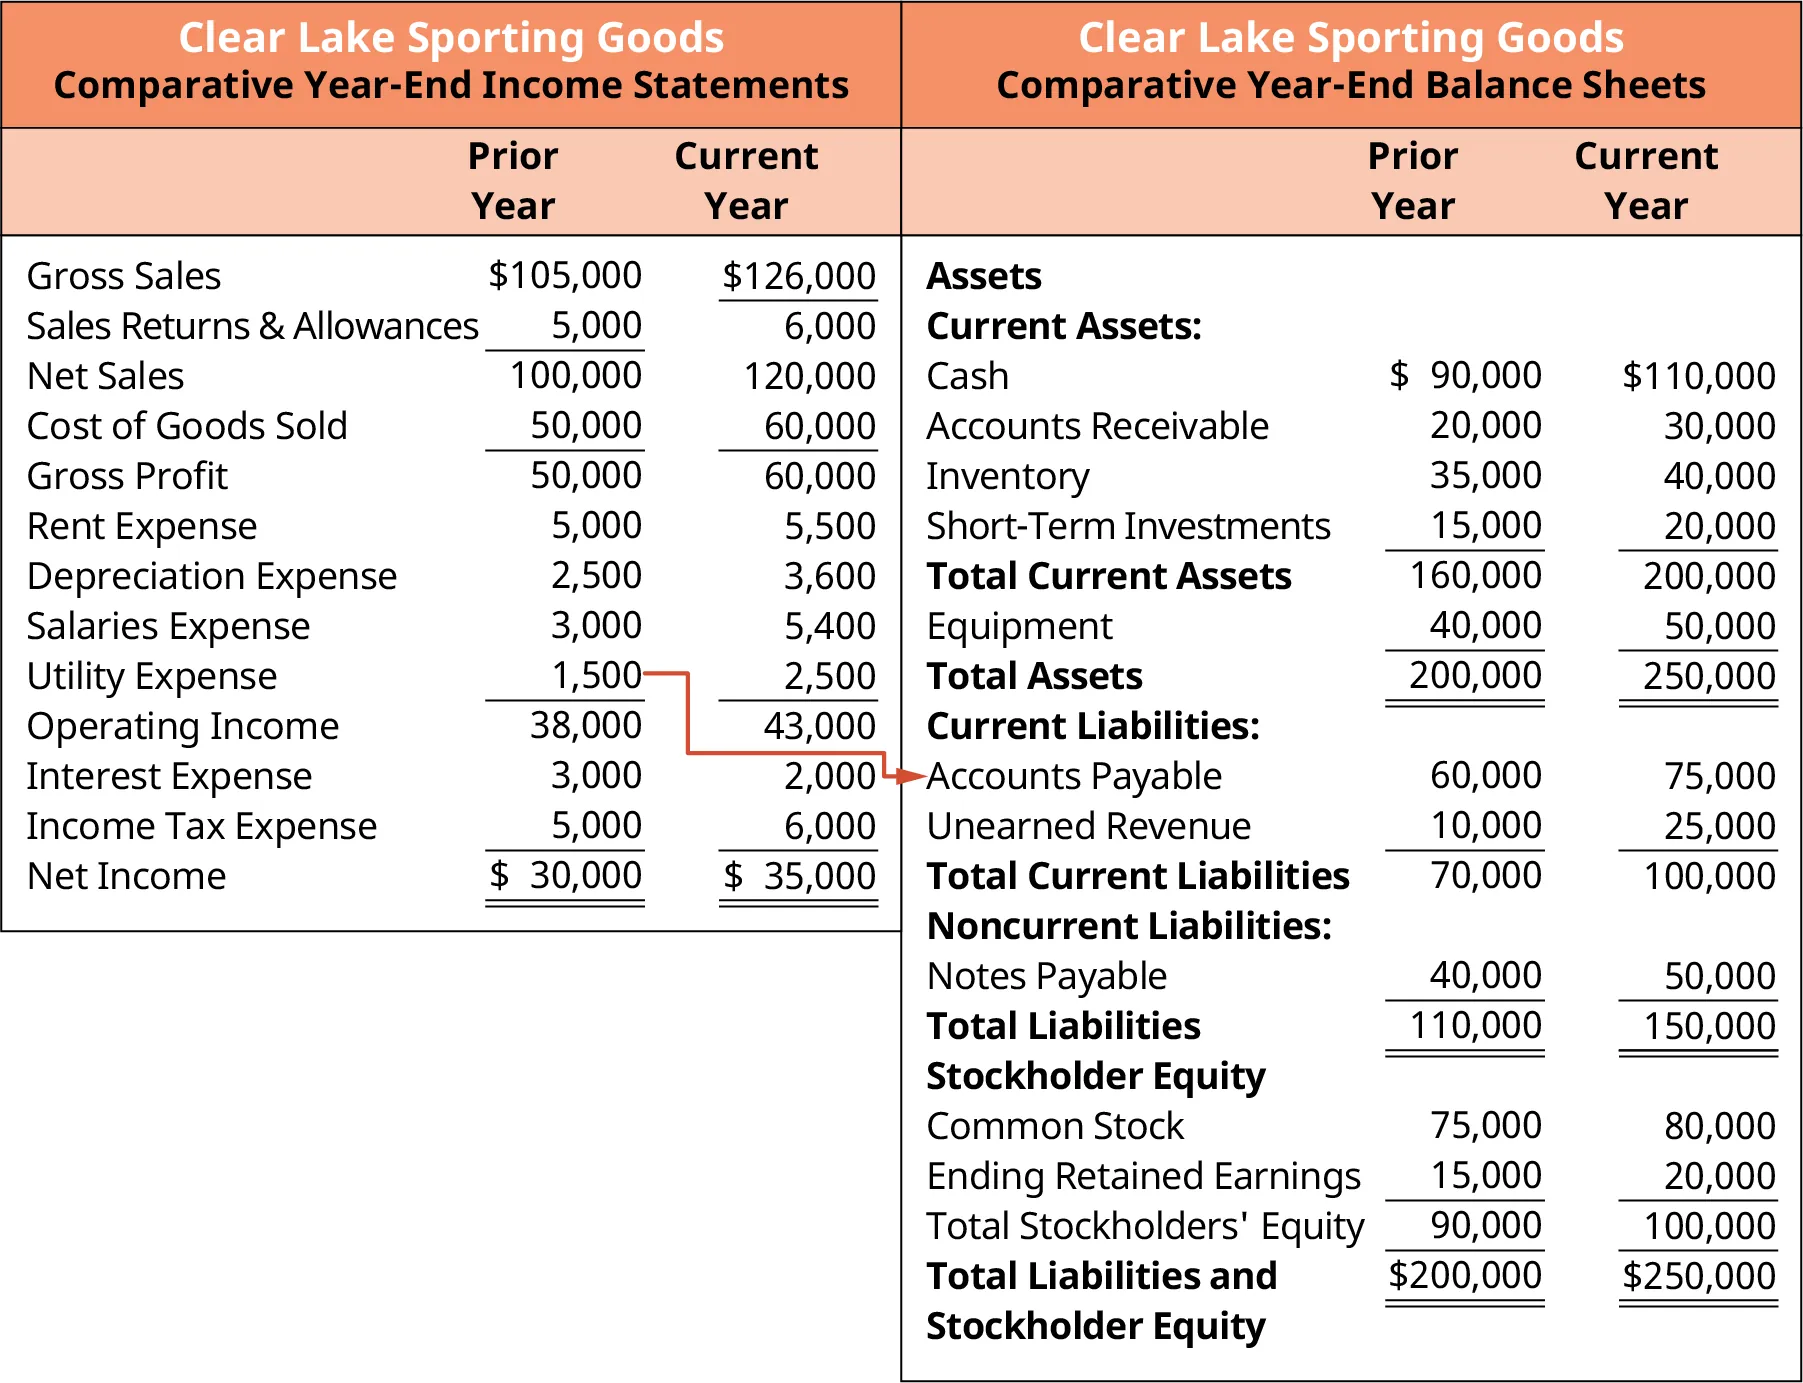 Connections between Clear Lake Sporting Goods’ Expenses and Accounts Payable. It shows that there is a relationship between the utility expense of $1,500 from the income statement and the accounts payable from the balance sheet.